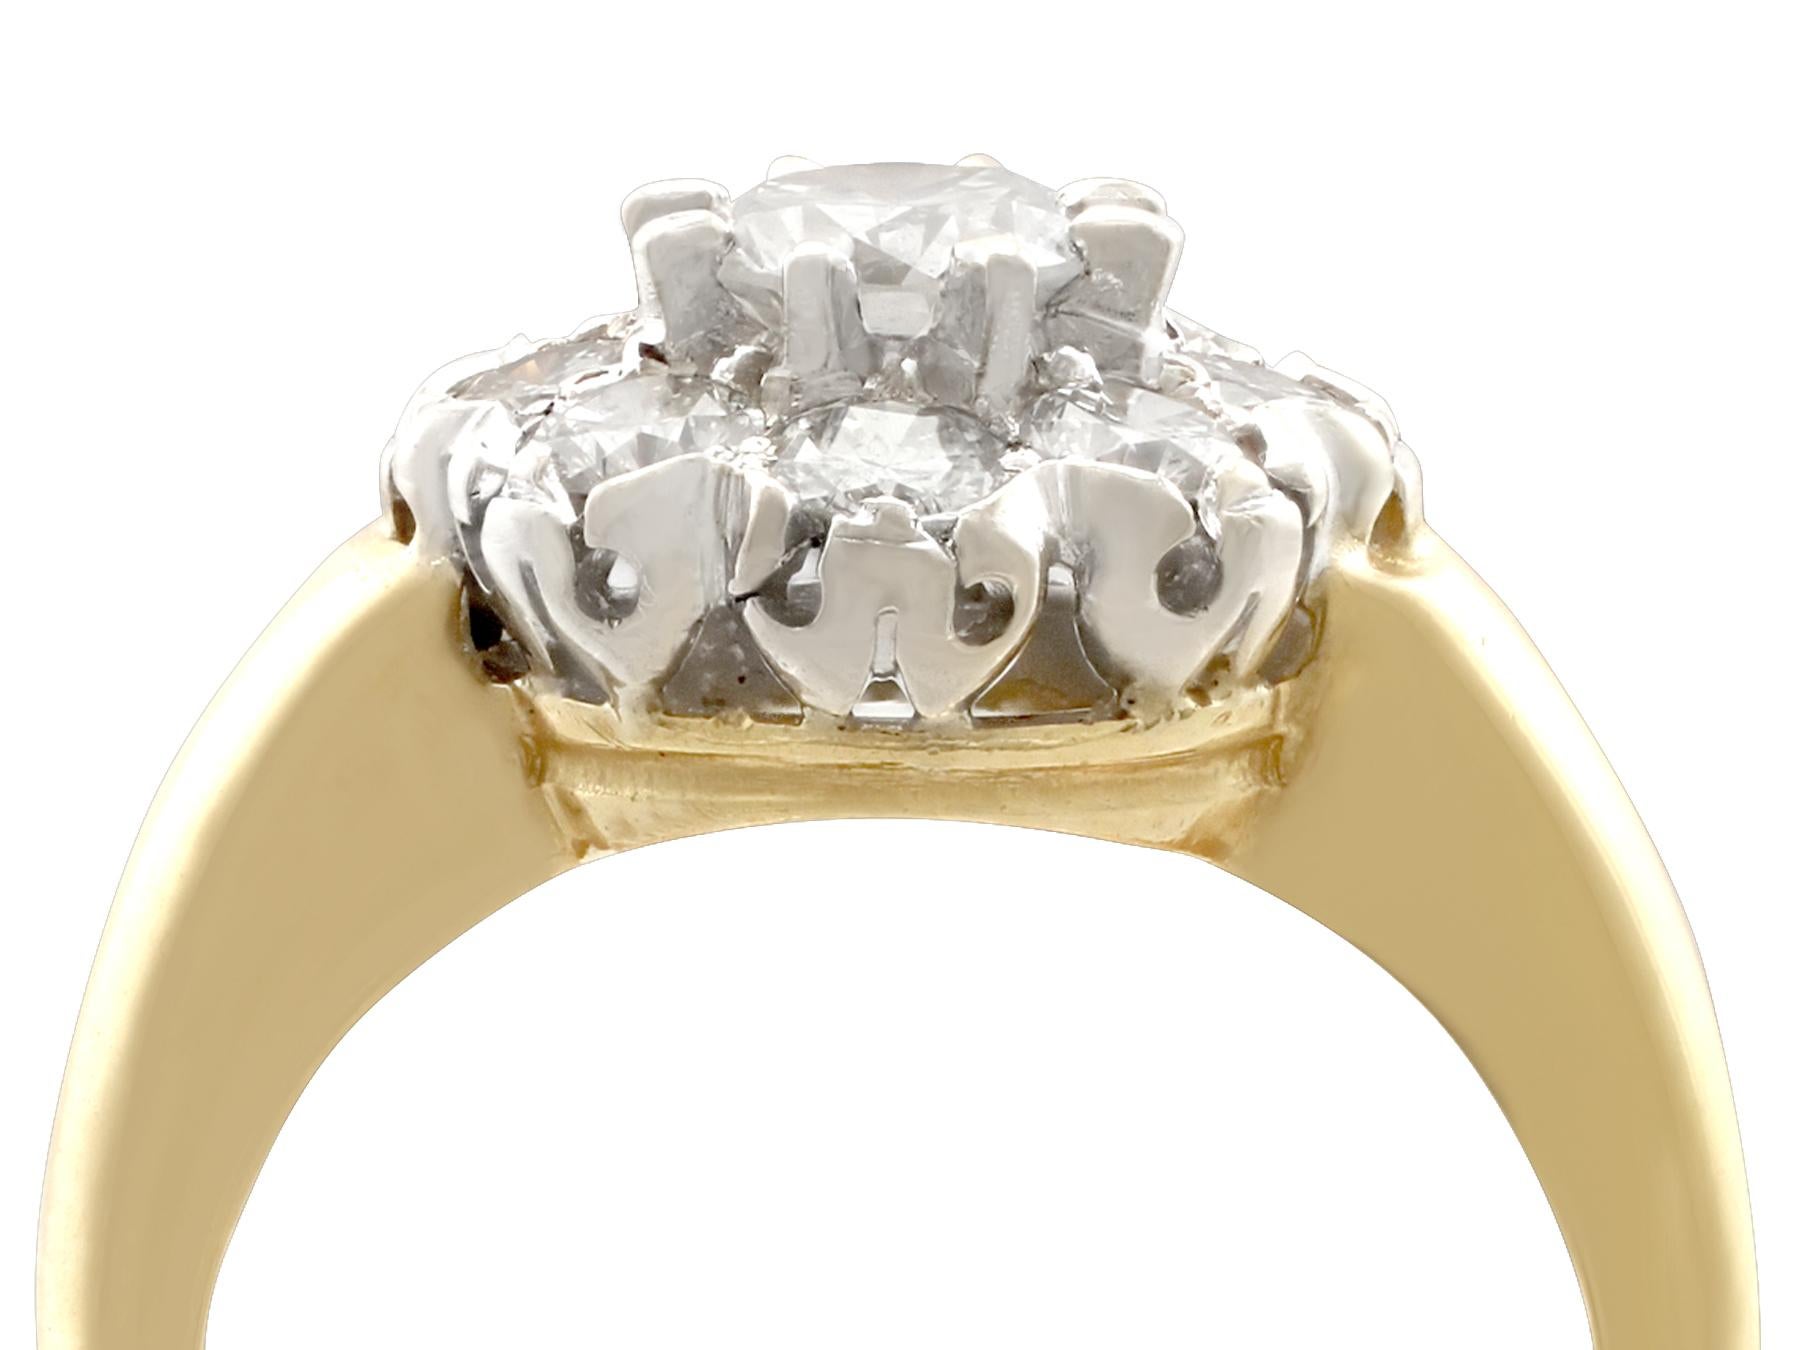 A stunning, fine and impressive vintage French 1.15 carat diamond, 18k yellow gold, 18k white gold set cluster ring; an addition to our vintage jewelry and estate jewelry collections

This stunning vintage diamond cluster ring has been crafted in